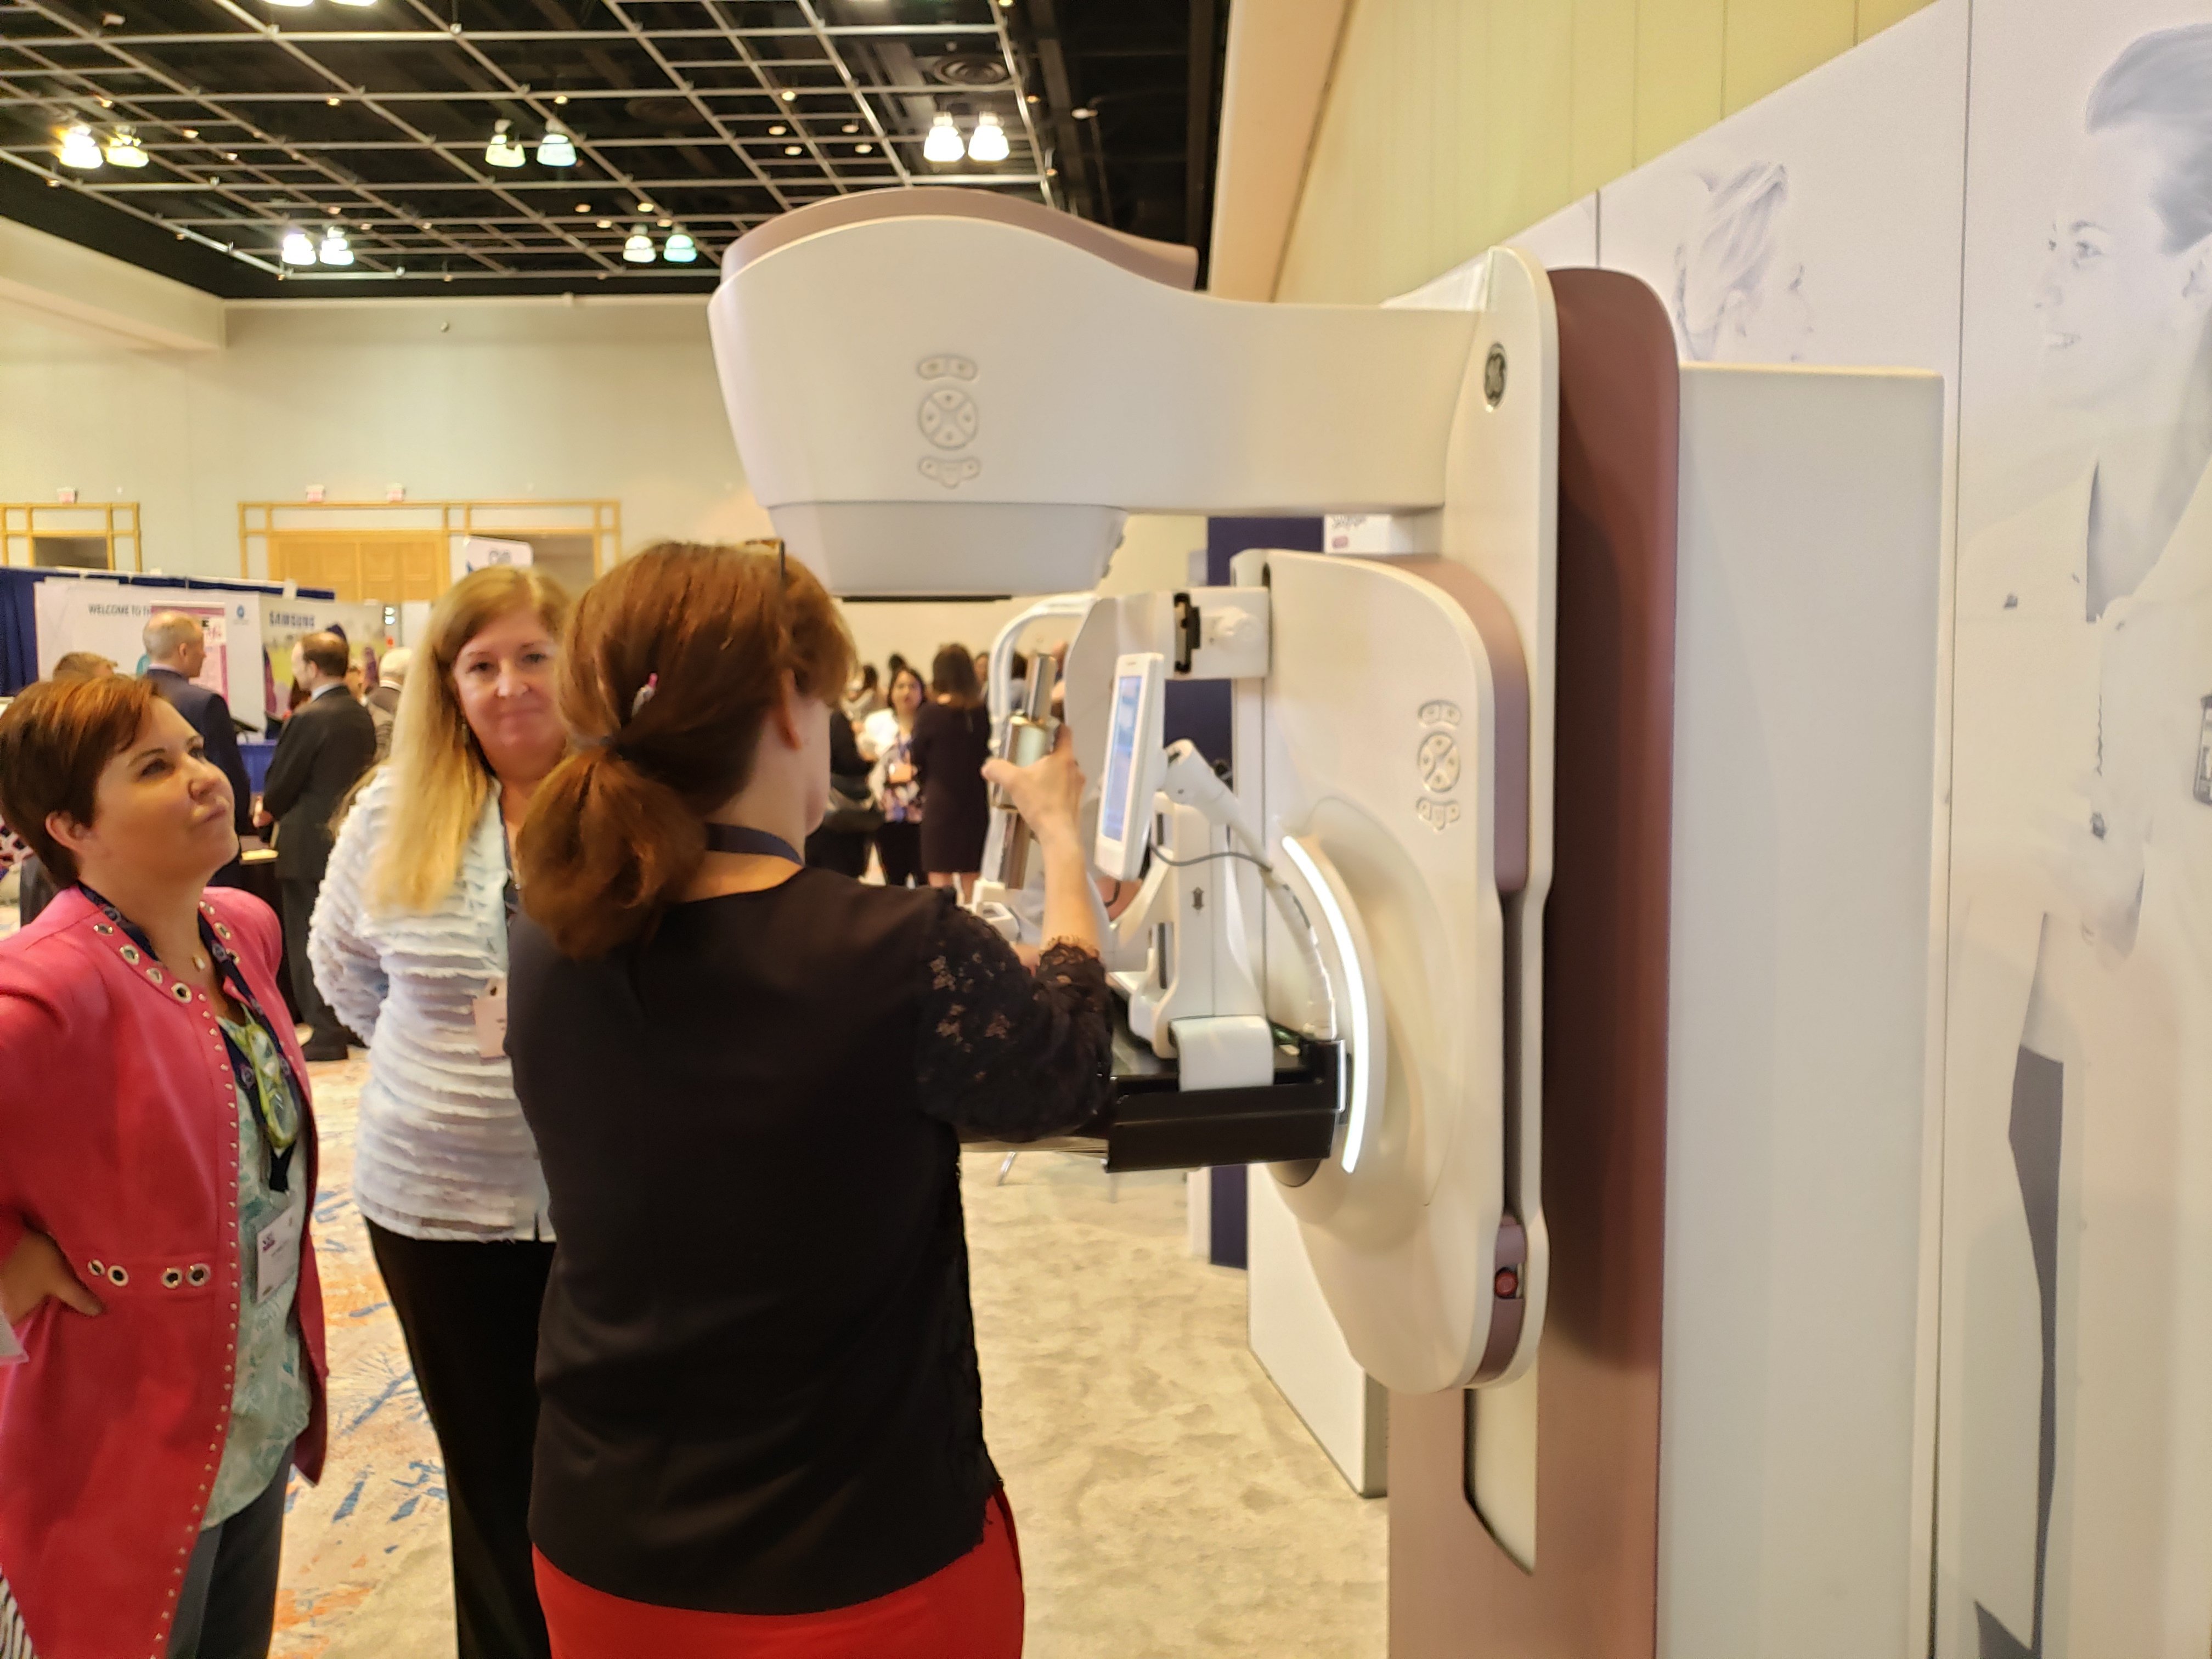 GE Healthcare showcases Senographe Pristina with its add-on-biopsy kit at the breast imaging symposium